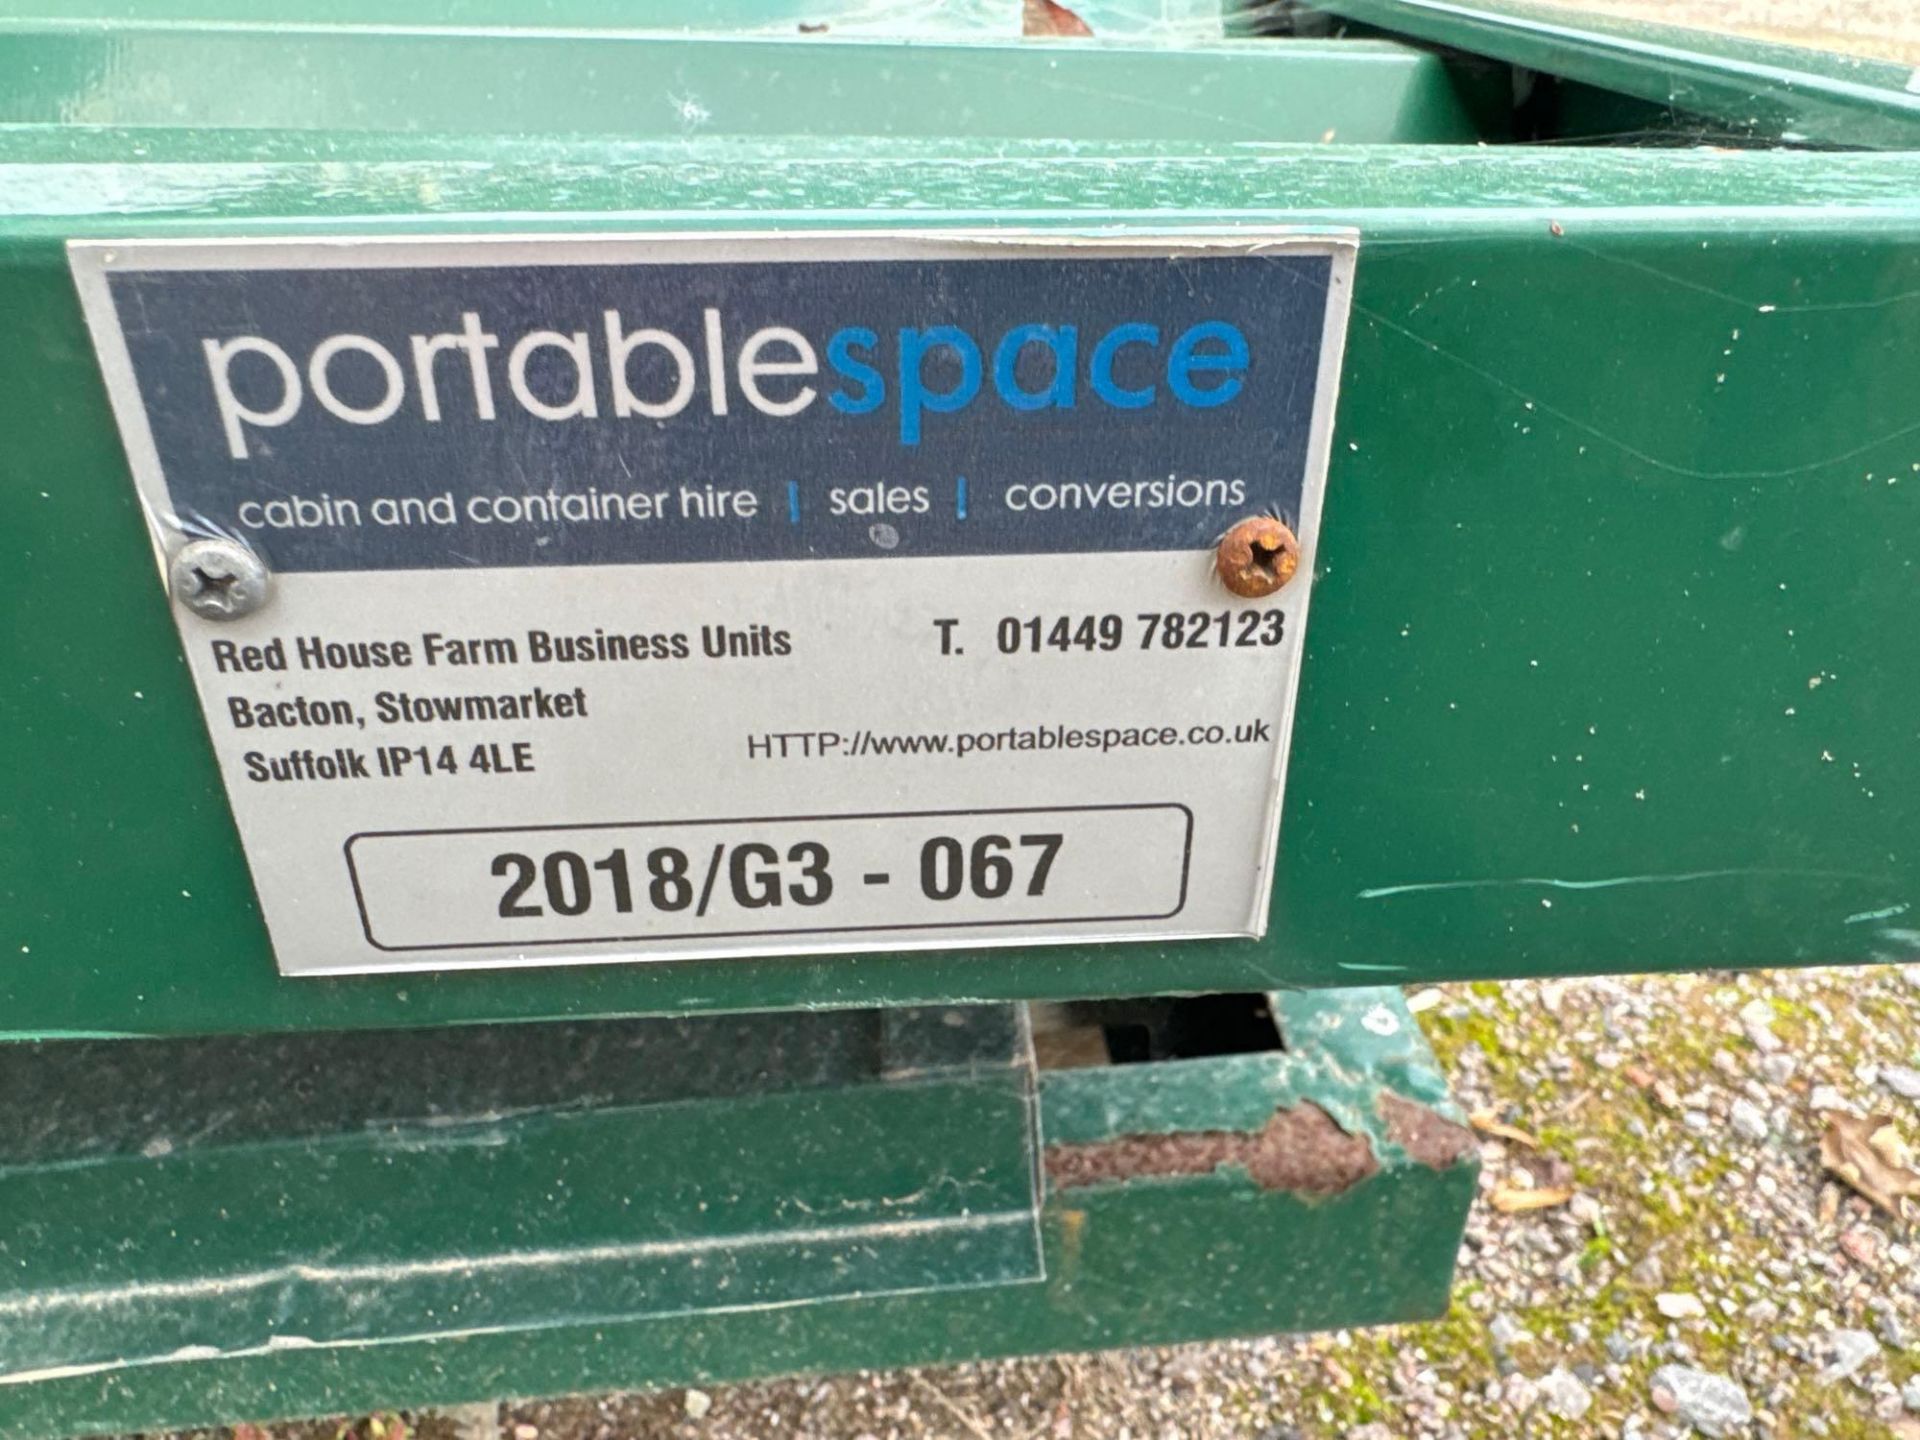 Portable Space Collapsible green metal shed (2018) s/n G3-067 - Image 2 of 2